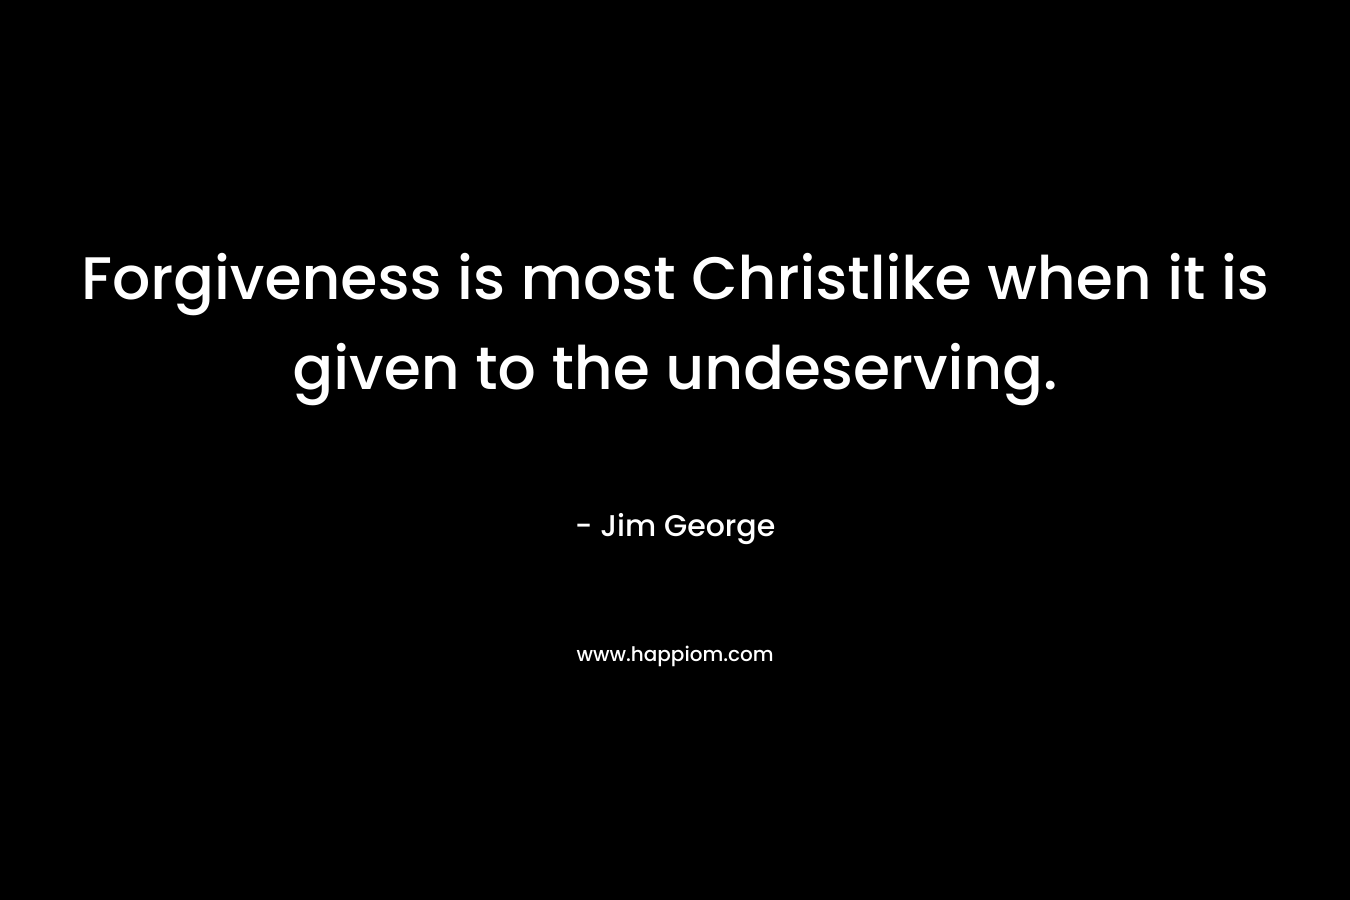 Forgiveness is most Christlike when it is given to the undeserving. – Jim George